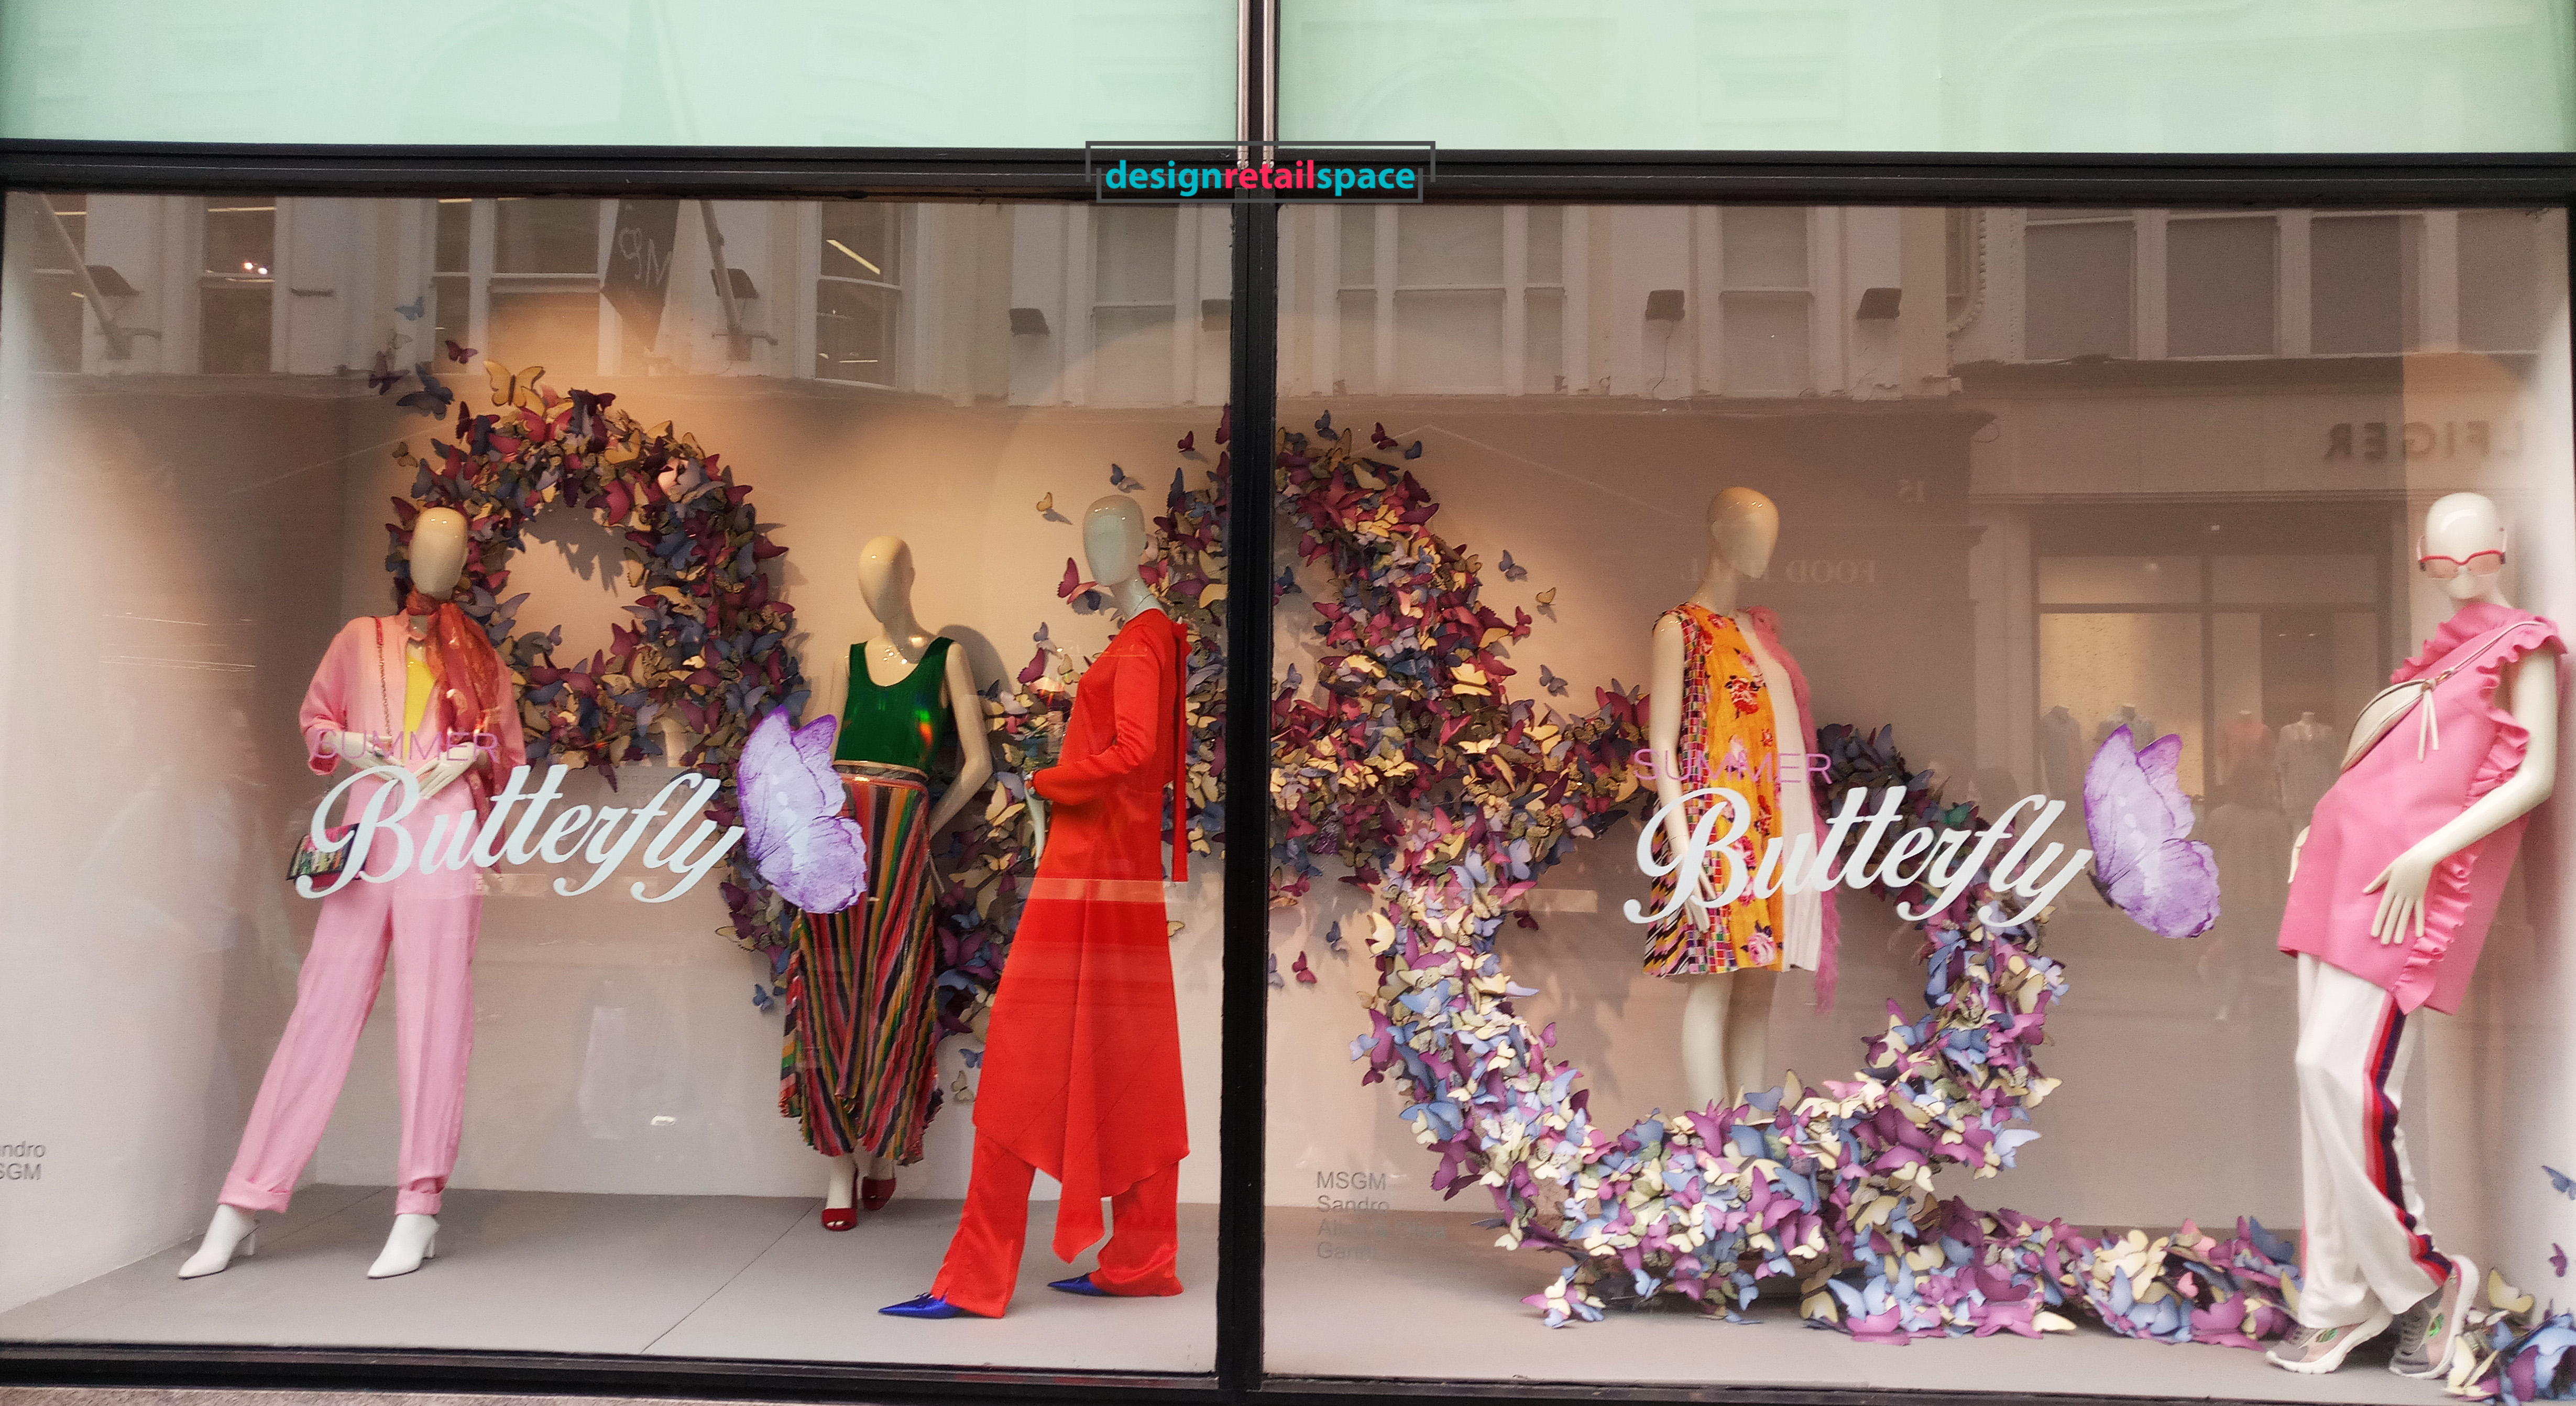 Brown Thomas window display showing lavender garlands of flowers formed in a horizontal ribbon representing colour trends 2018